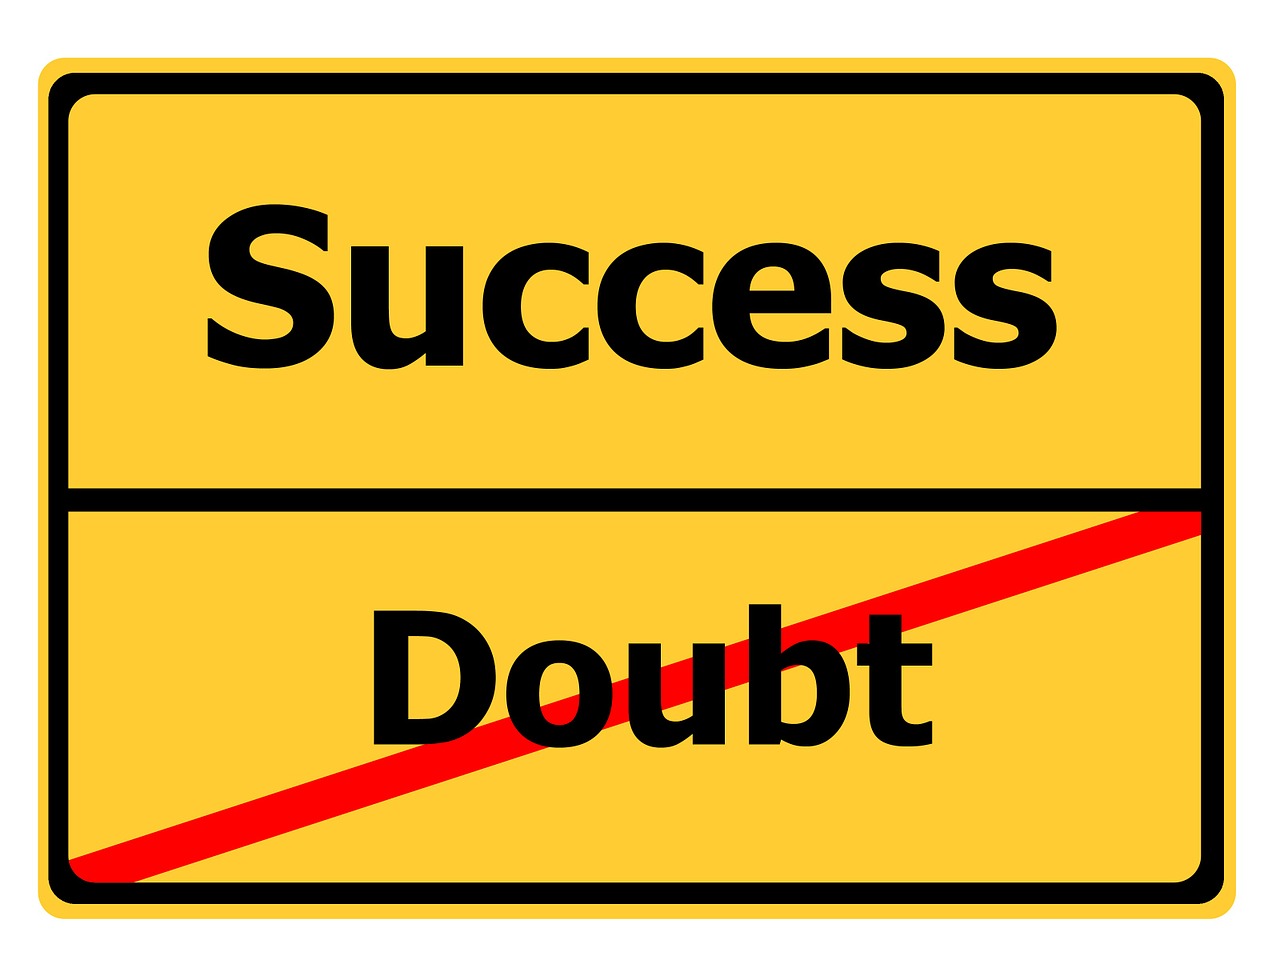 doubt success road sign free photo